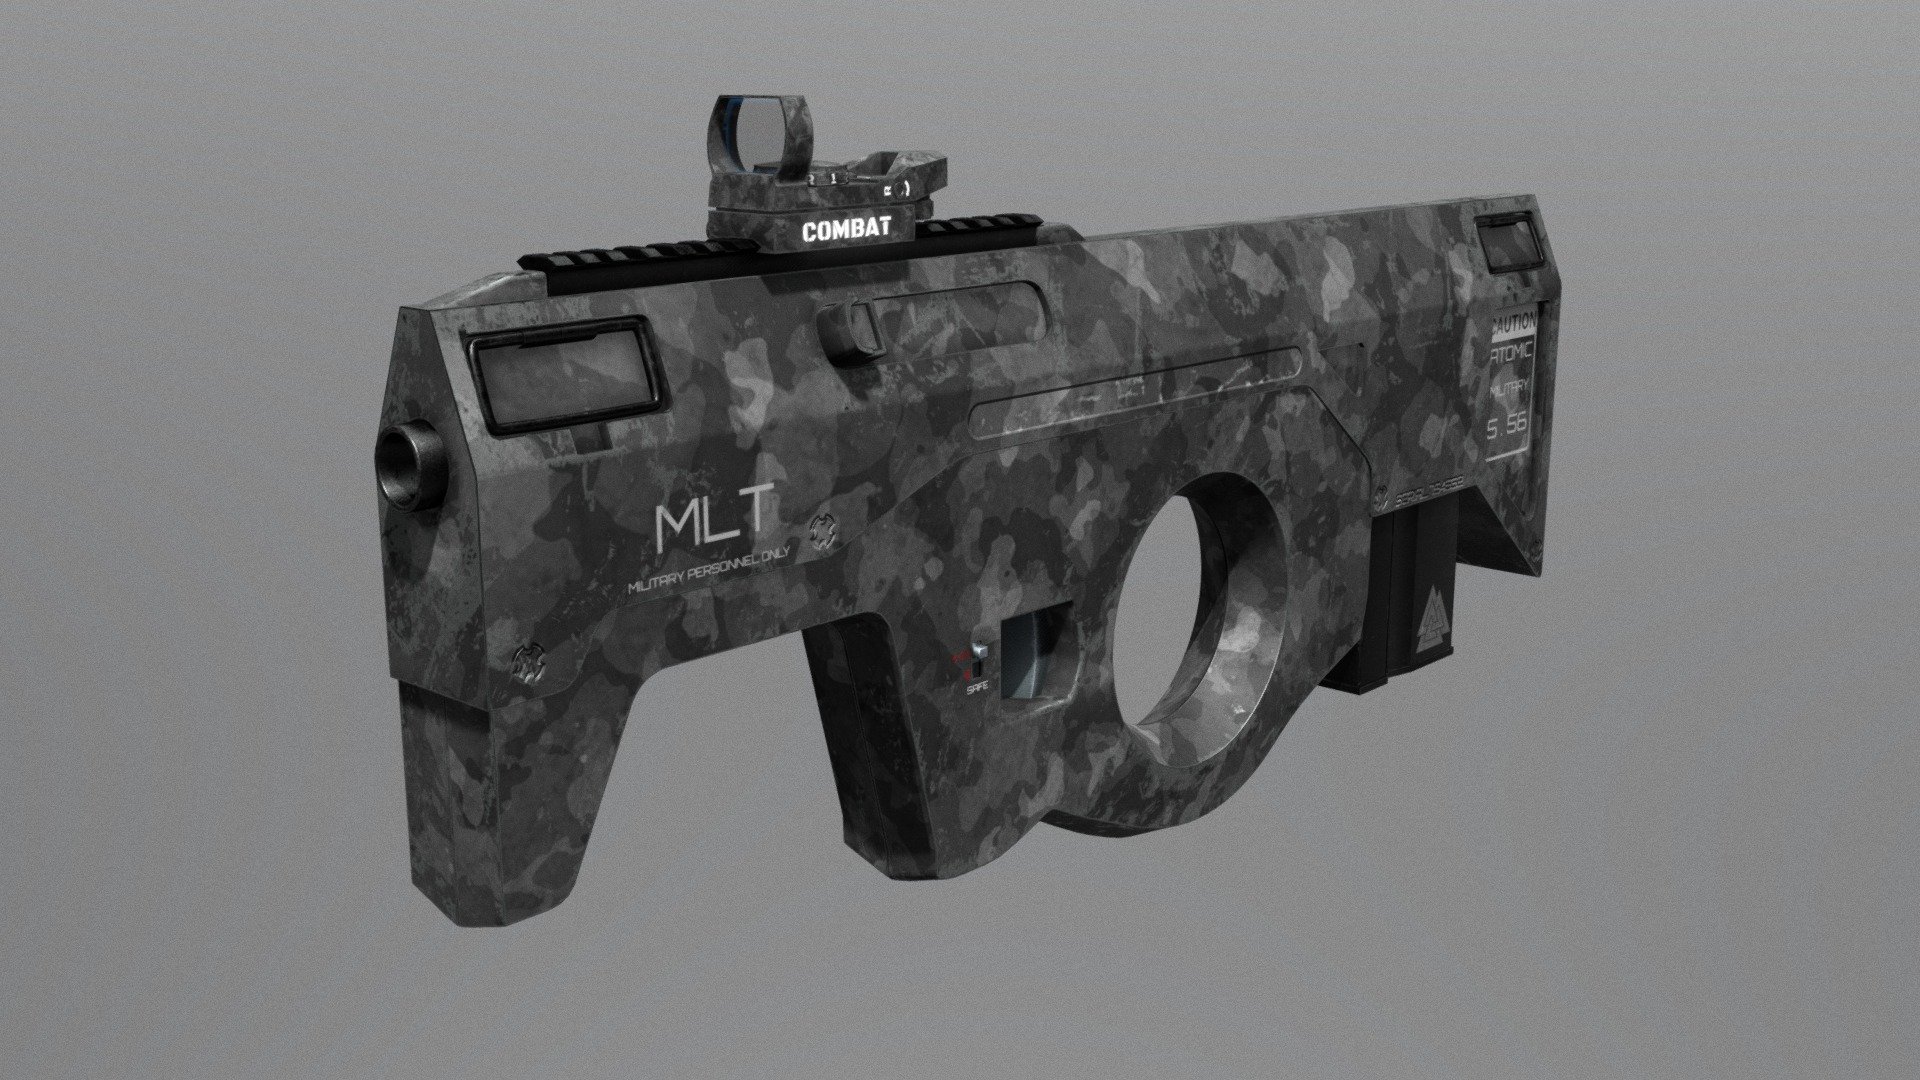 Rifle model invented and developed by me.

Have high quality 4K textures .

Created to be used in a modern engine that supports physically based rendering (PBR) comes with textures optimized for Unreal Engine 4 and Unity

If you have any questions - feel free to ask them! - Bullpup Rifle - Buy Royalty Free 3D model by Karevus (@kaliukh) 3d model